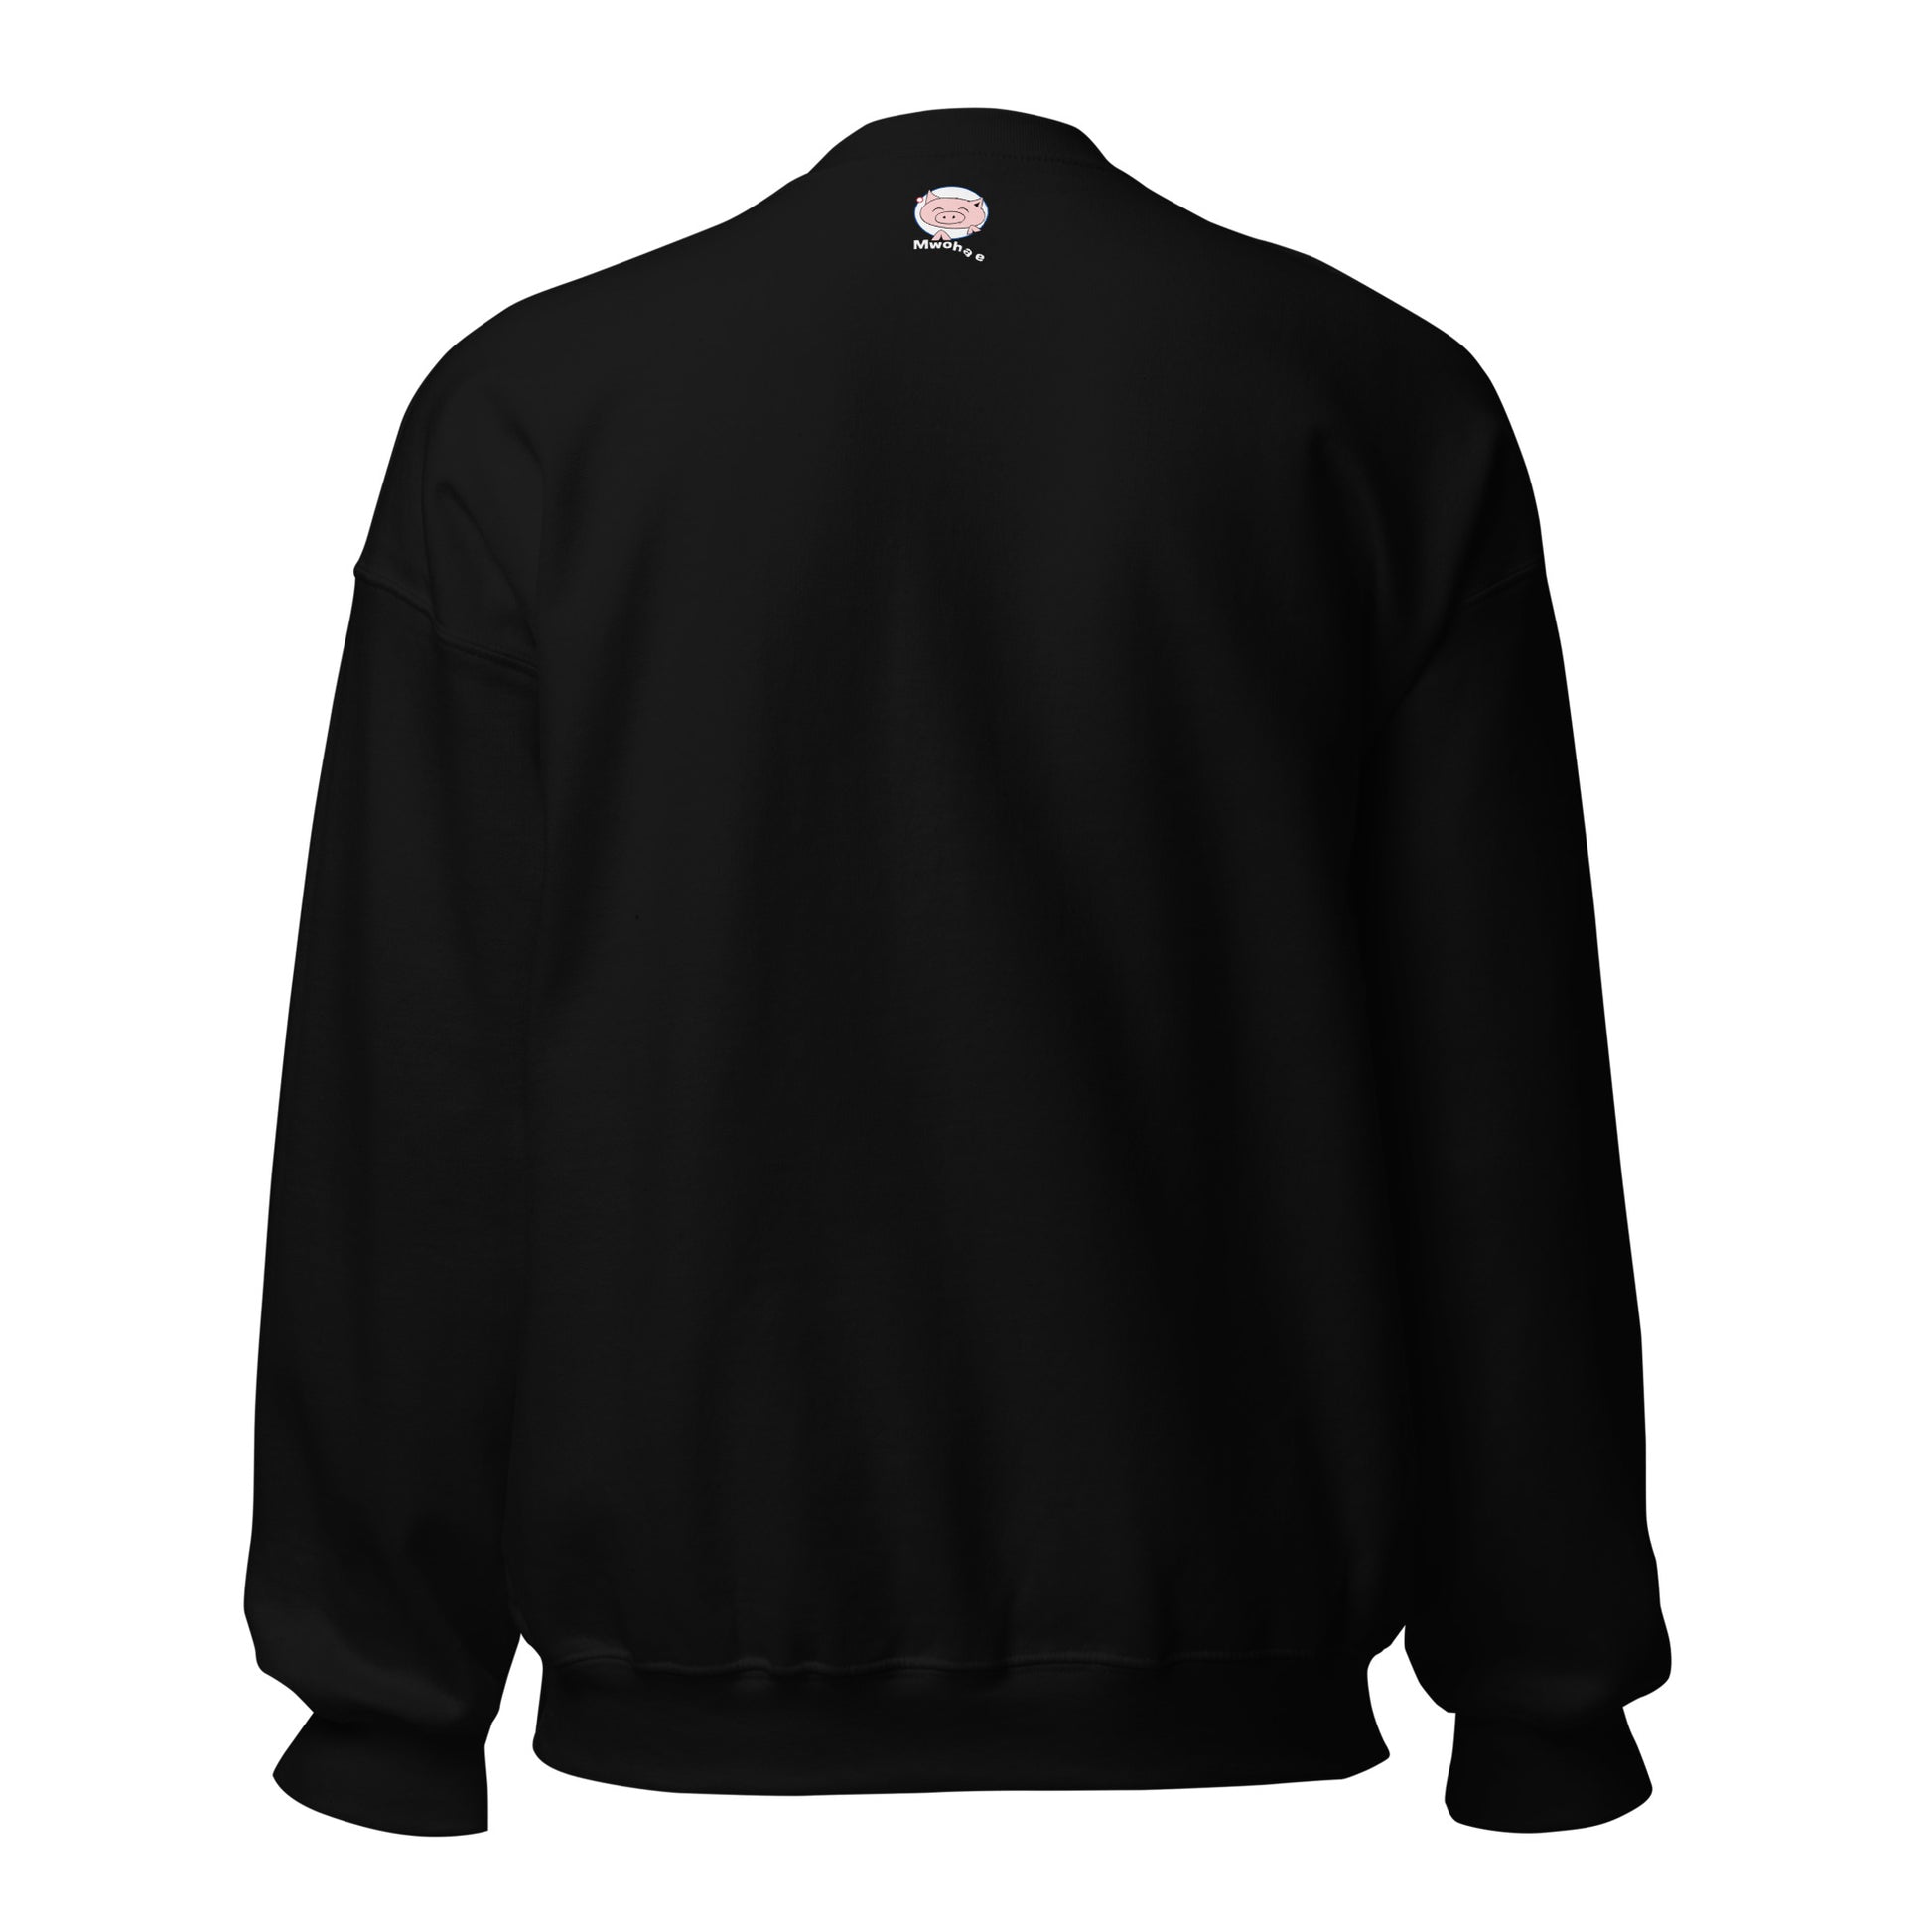 Black sweatshirt with small Mwohae logo on the back